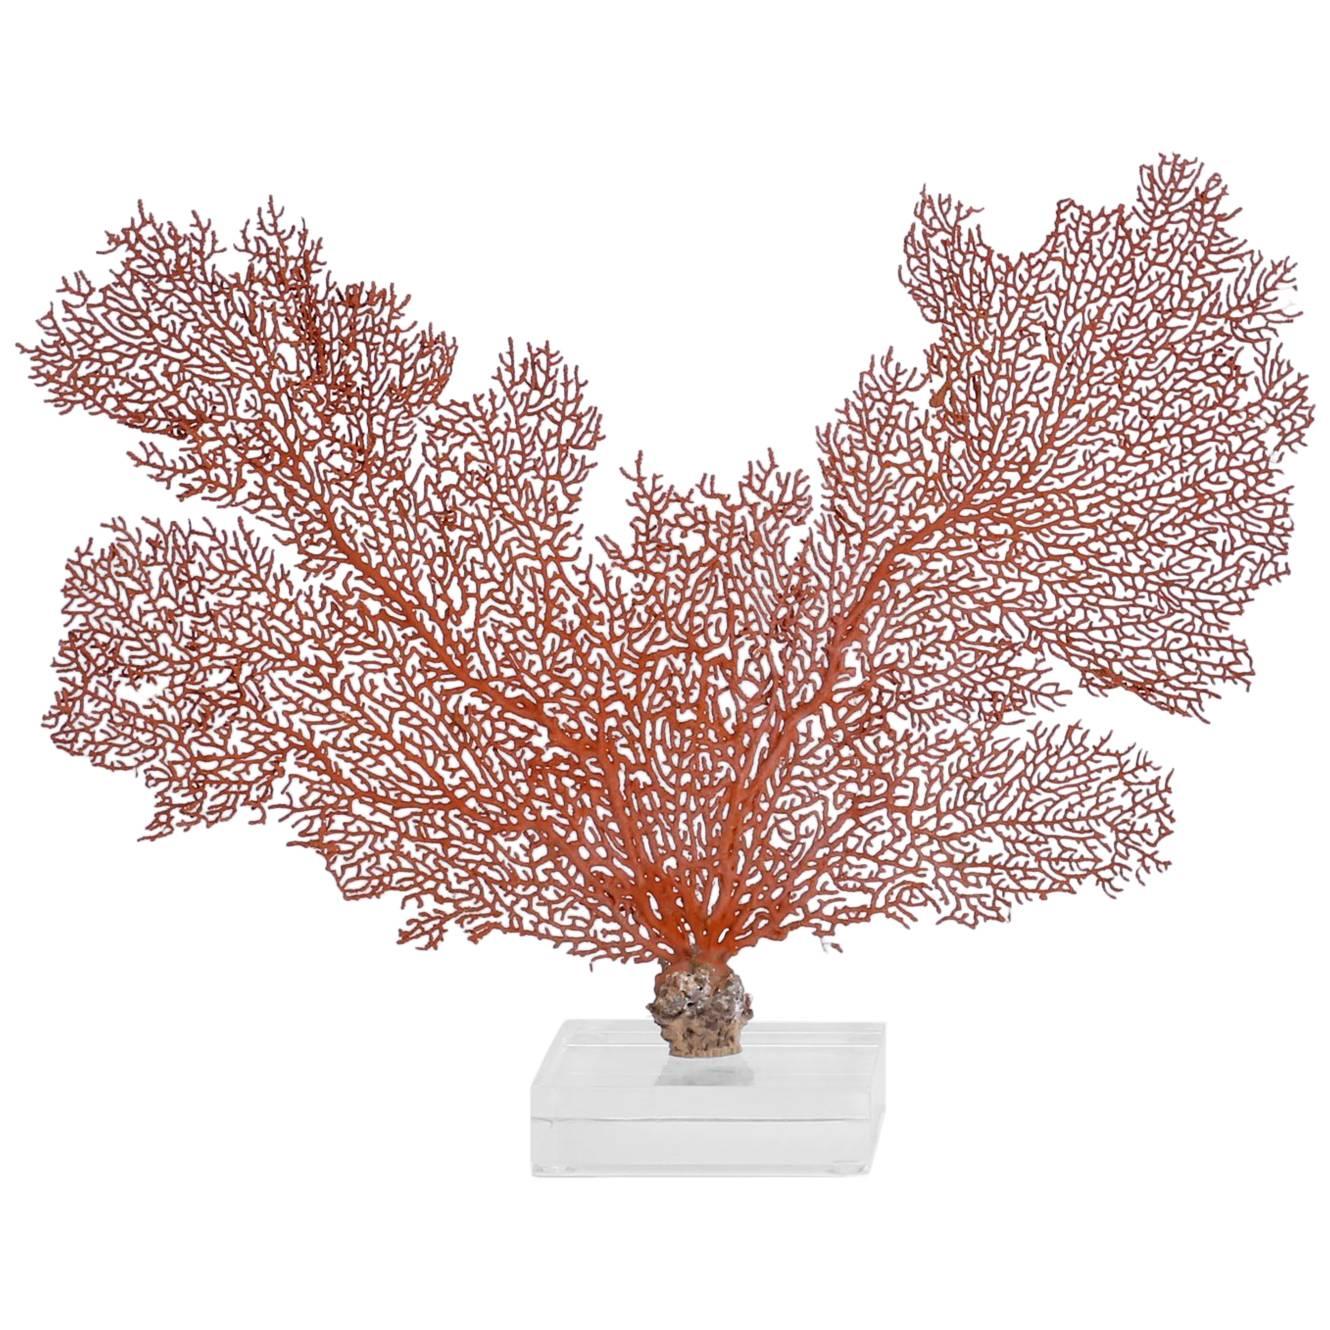 Red Sea Fan on Lucite